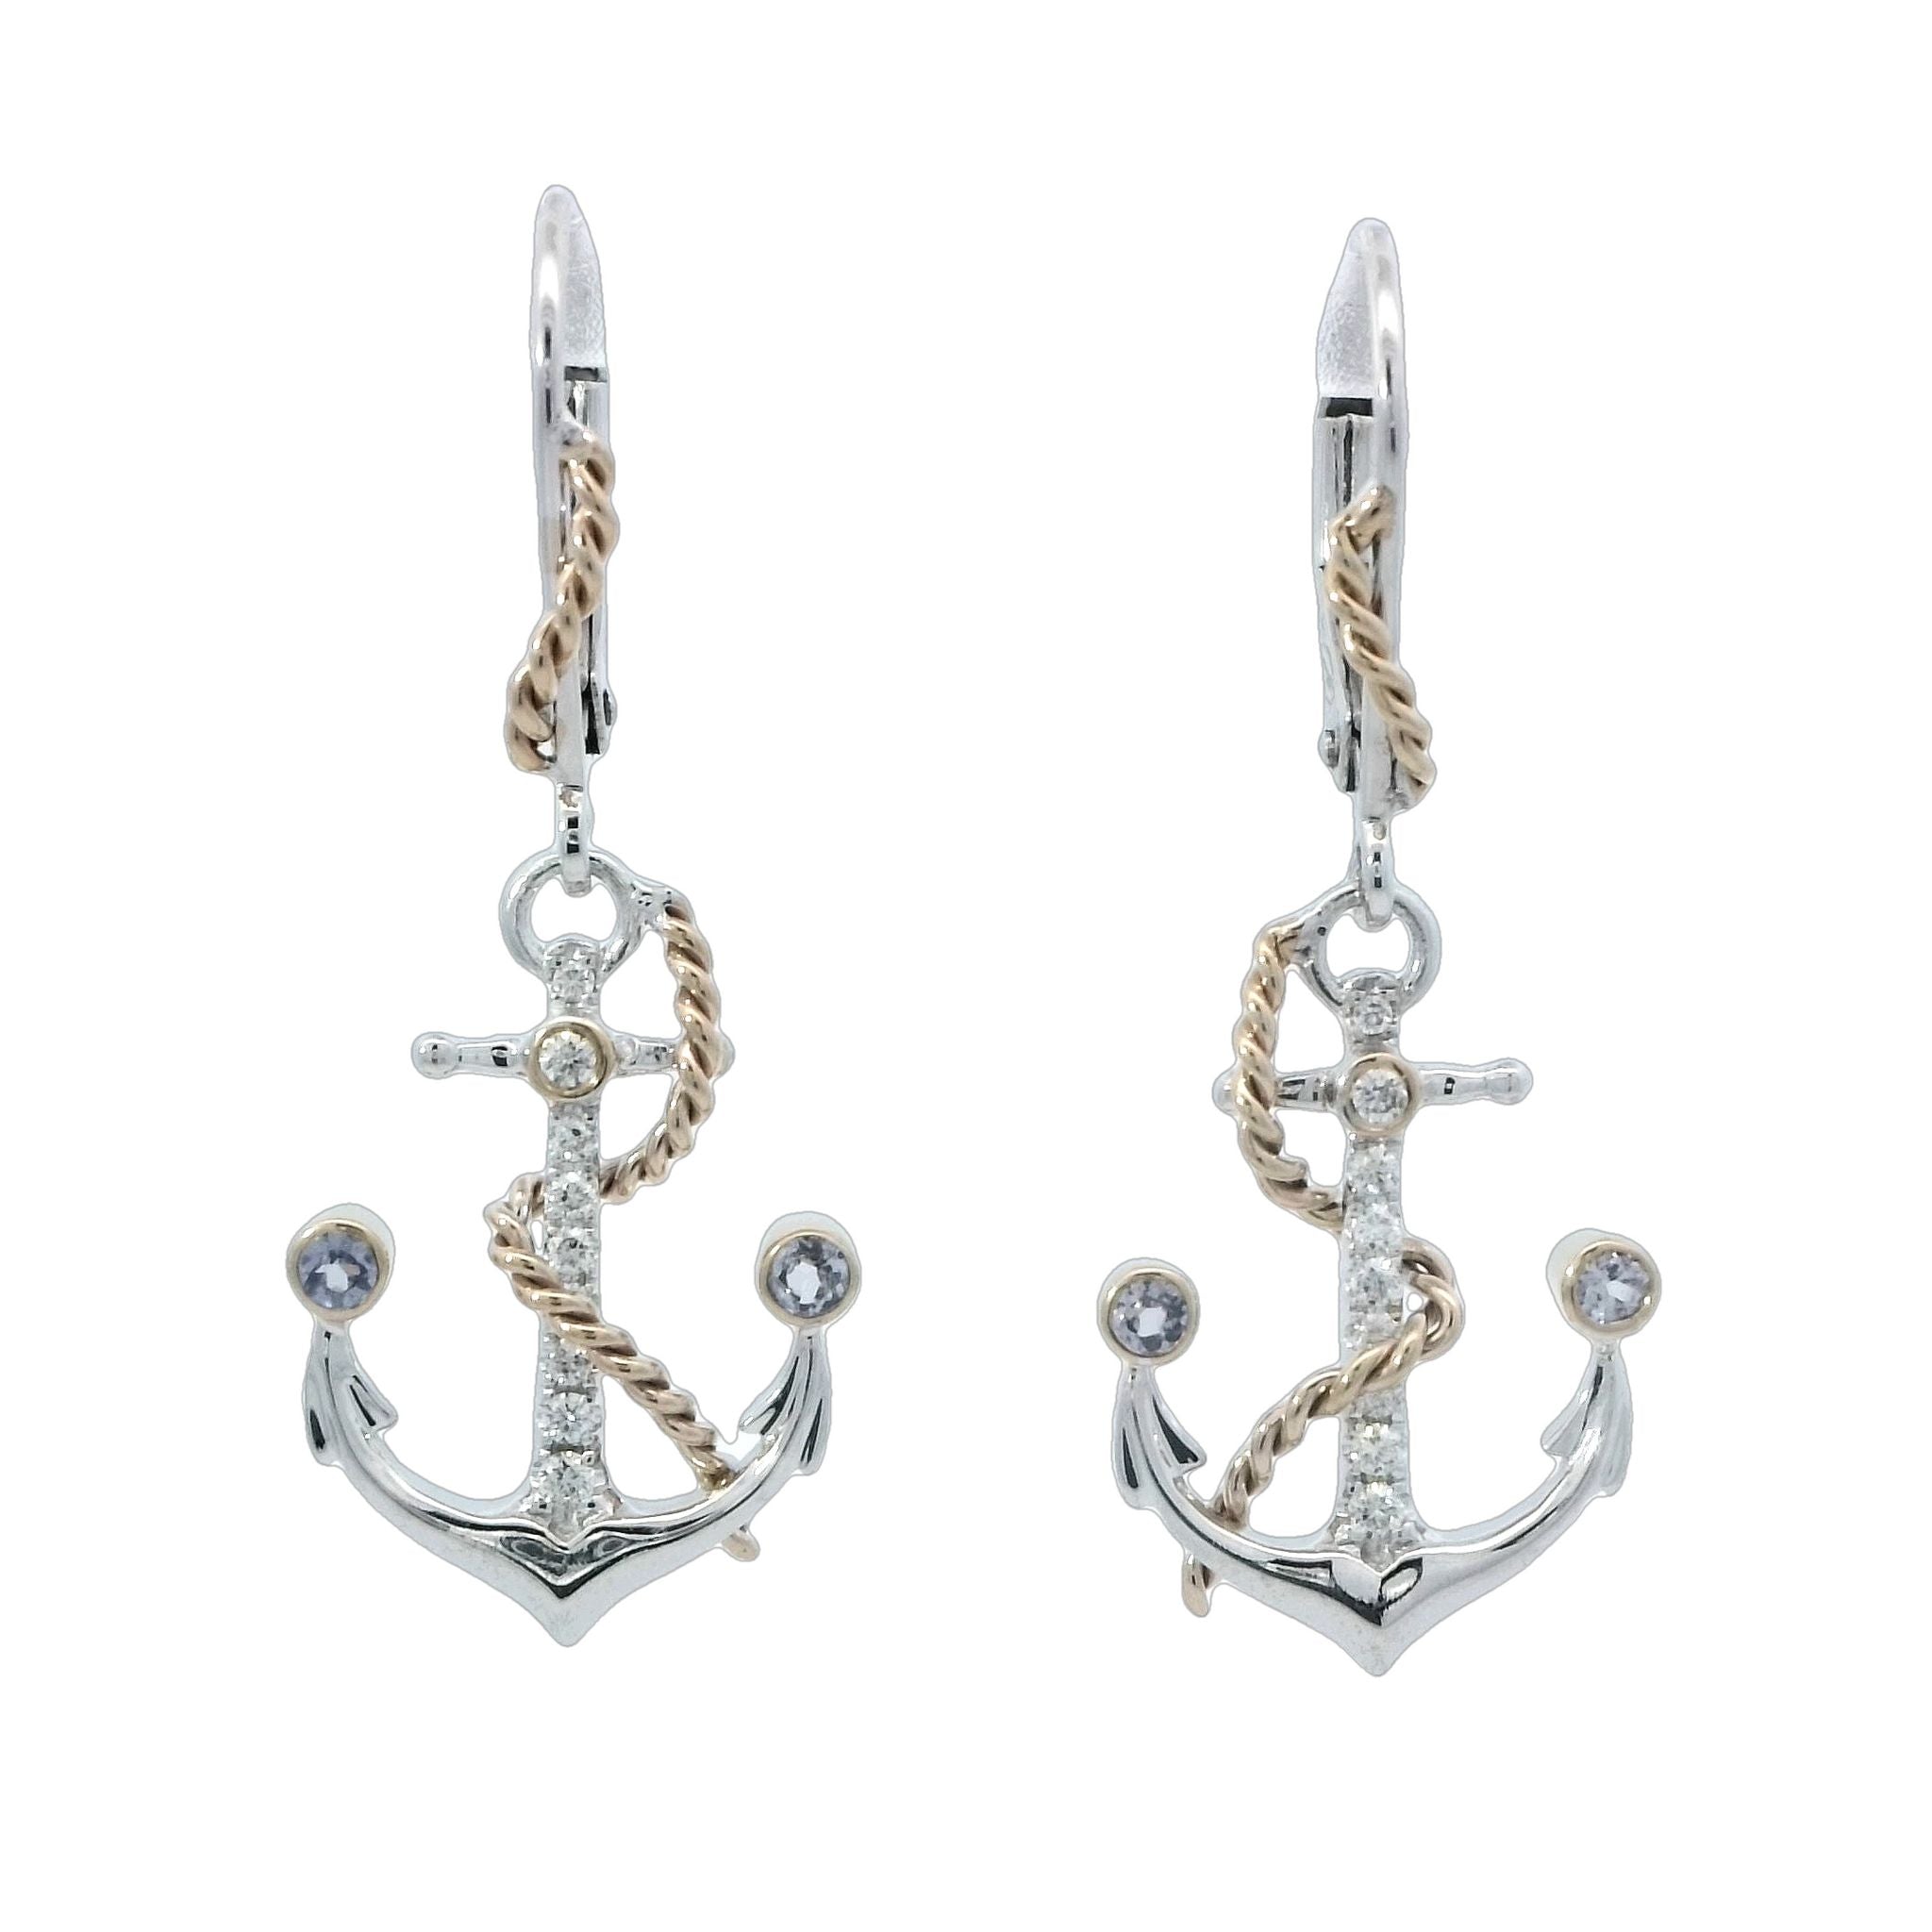 Anchor Earrings in Two Tone Gold